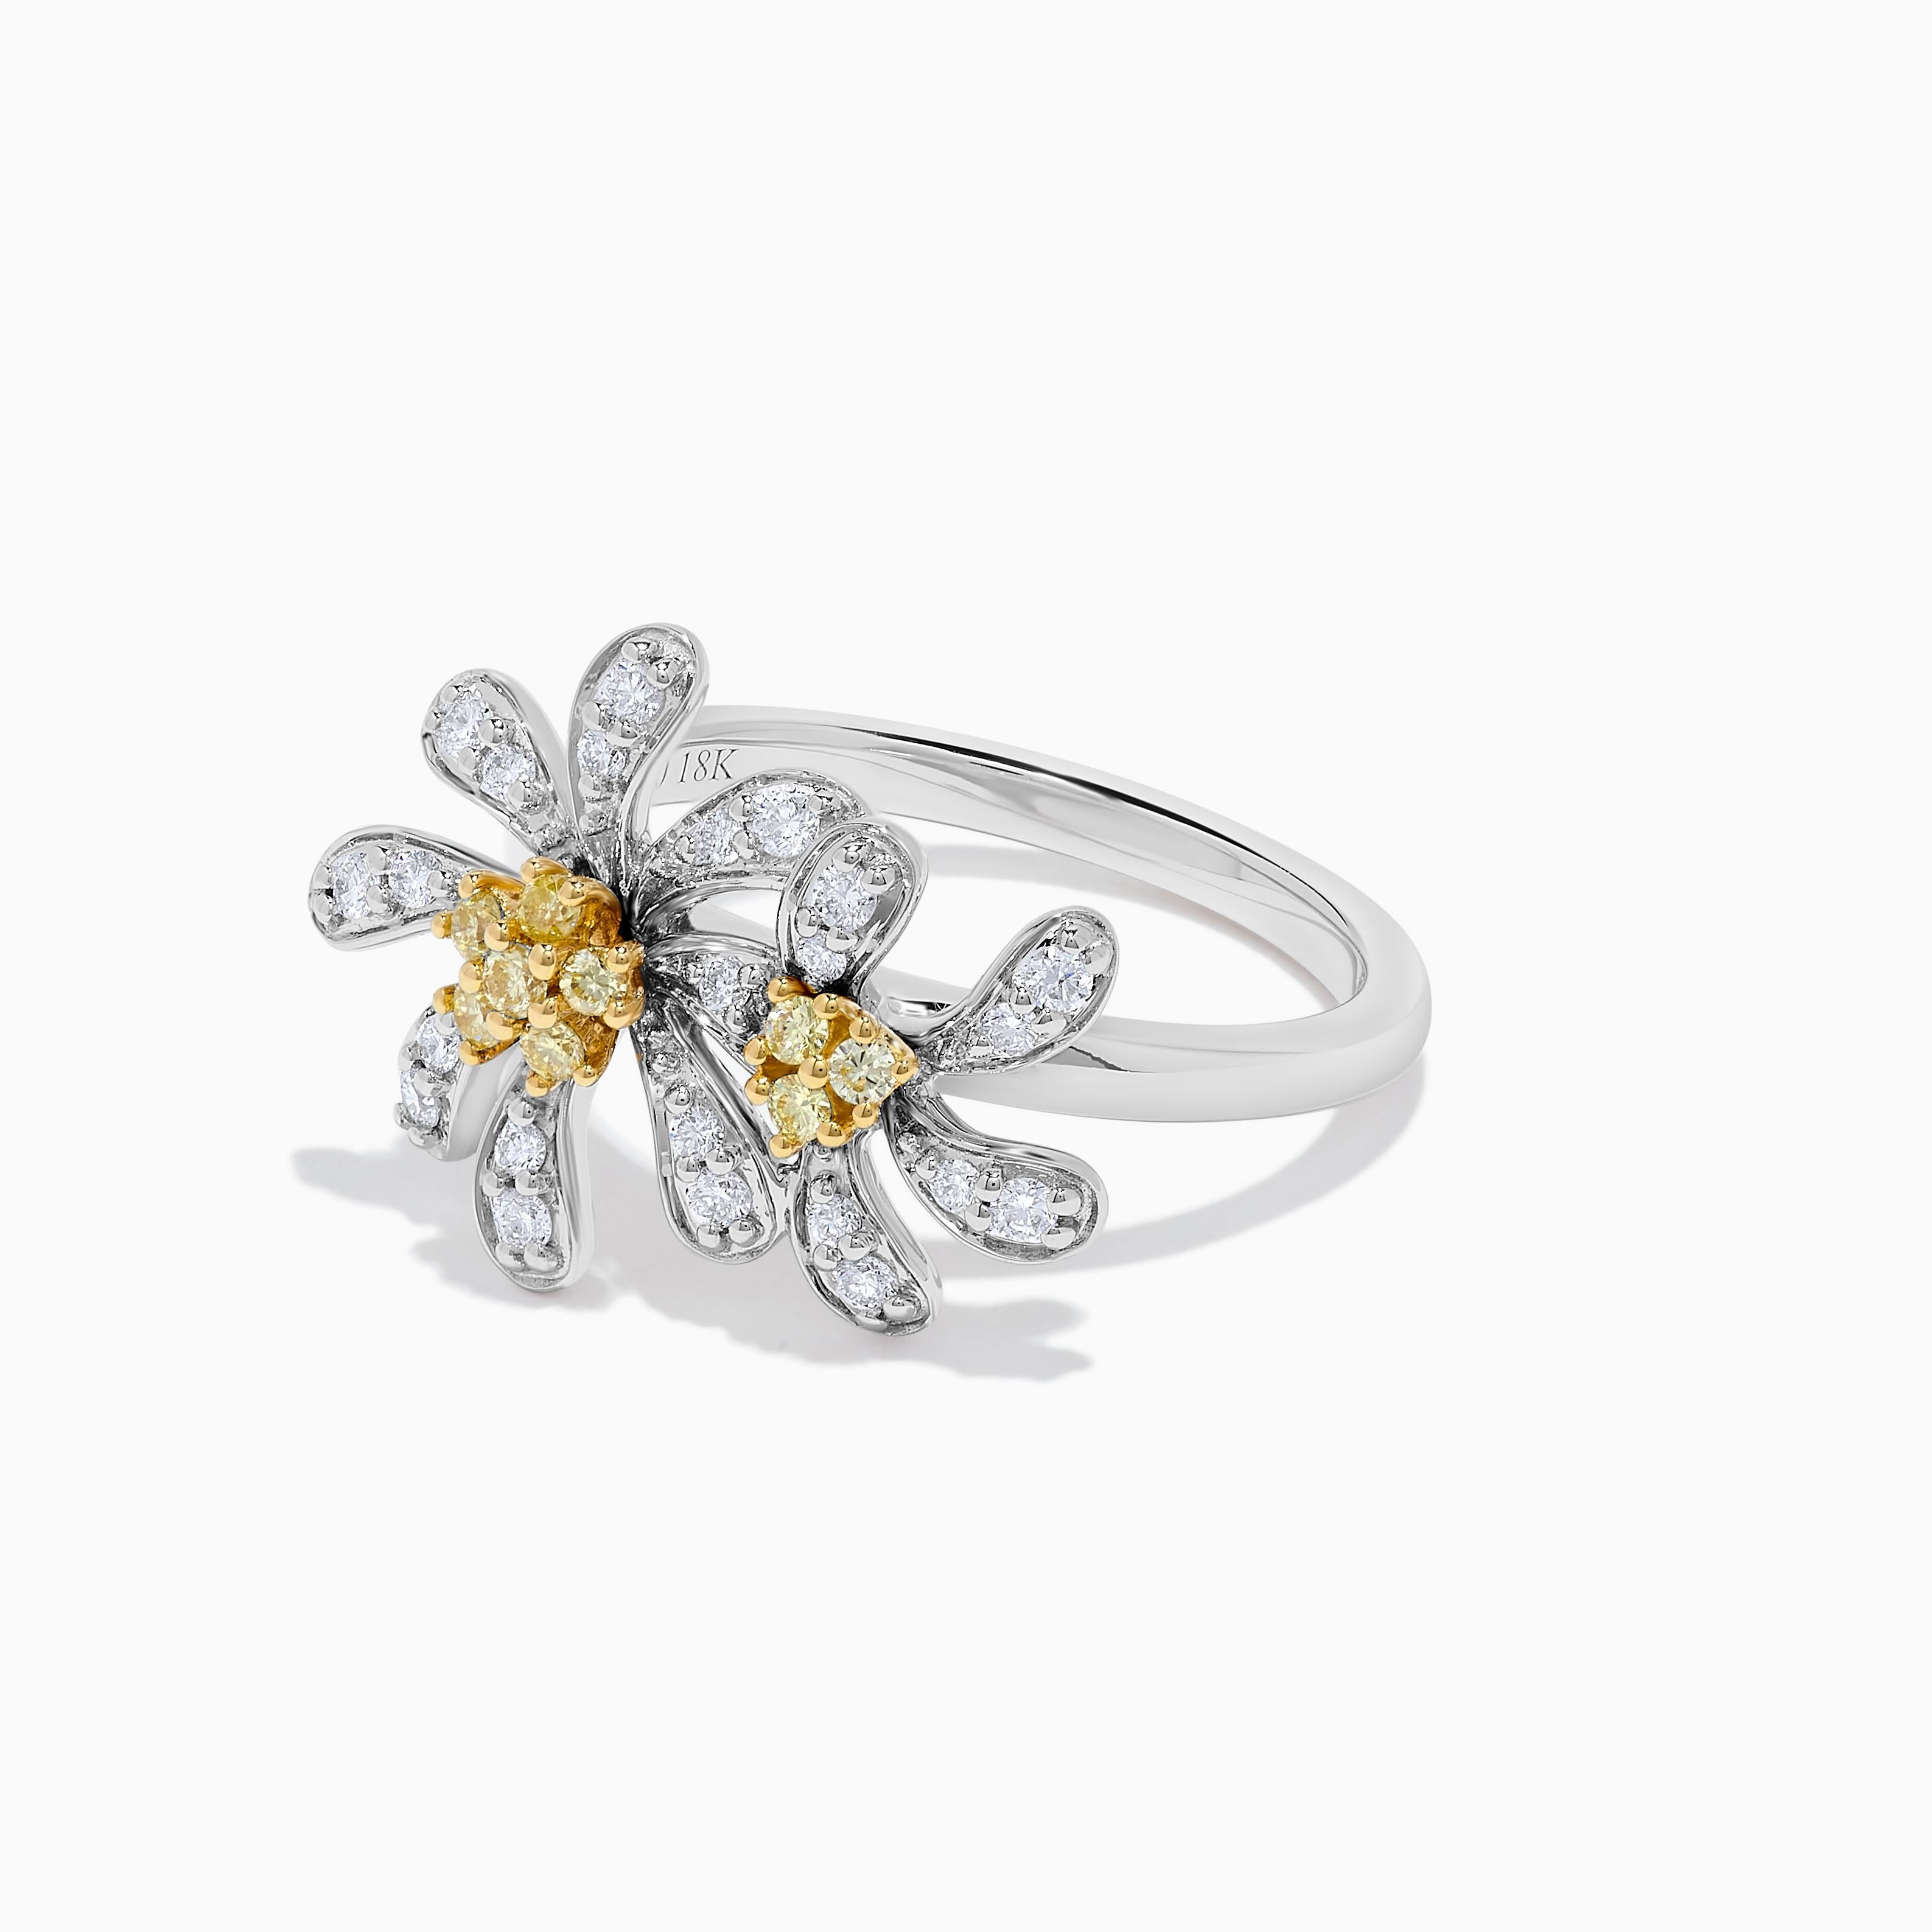 RareGemWorld's classic diamond ring. Mounted in a beautiful 18K Yellow and White Gold setting with a natural round cut yellow diamond melee complimented by round natural white diamond melee. This ring is guaranteed to impress and enhance your